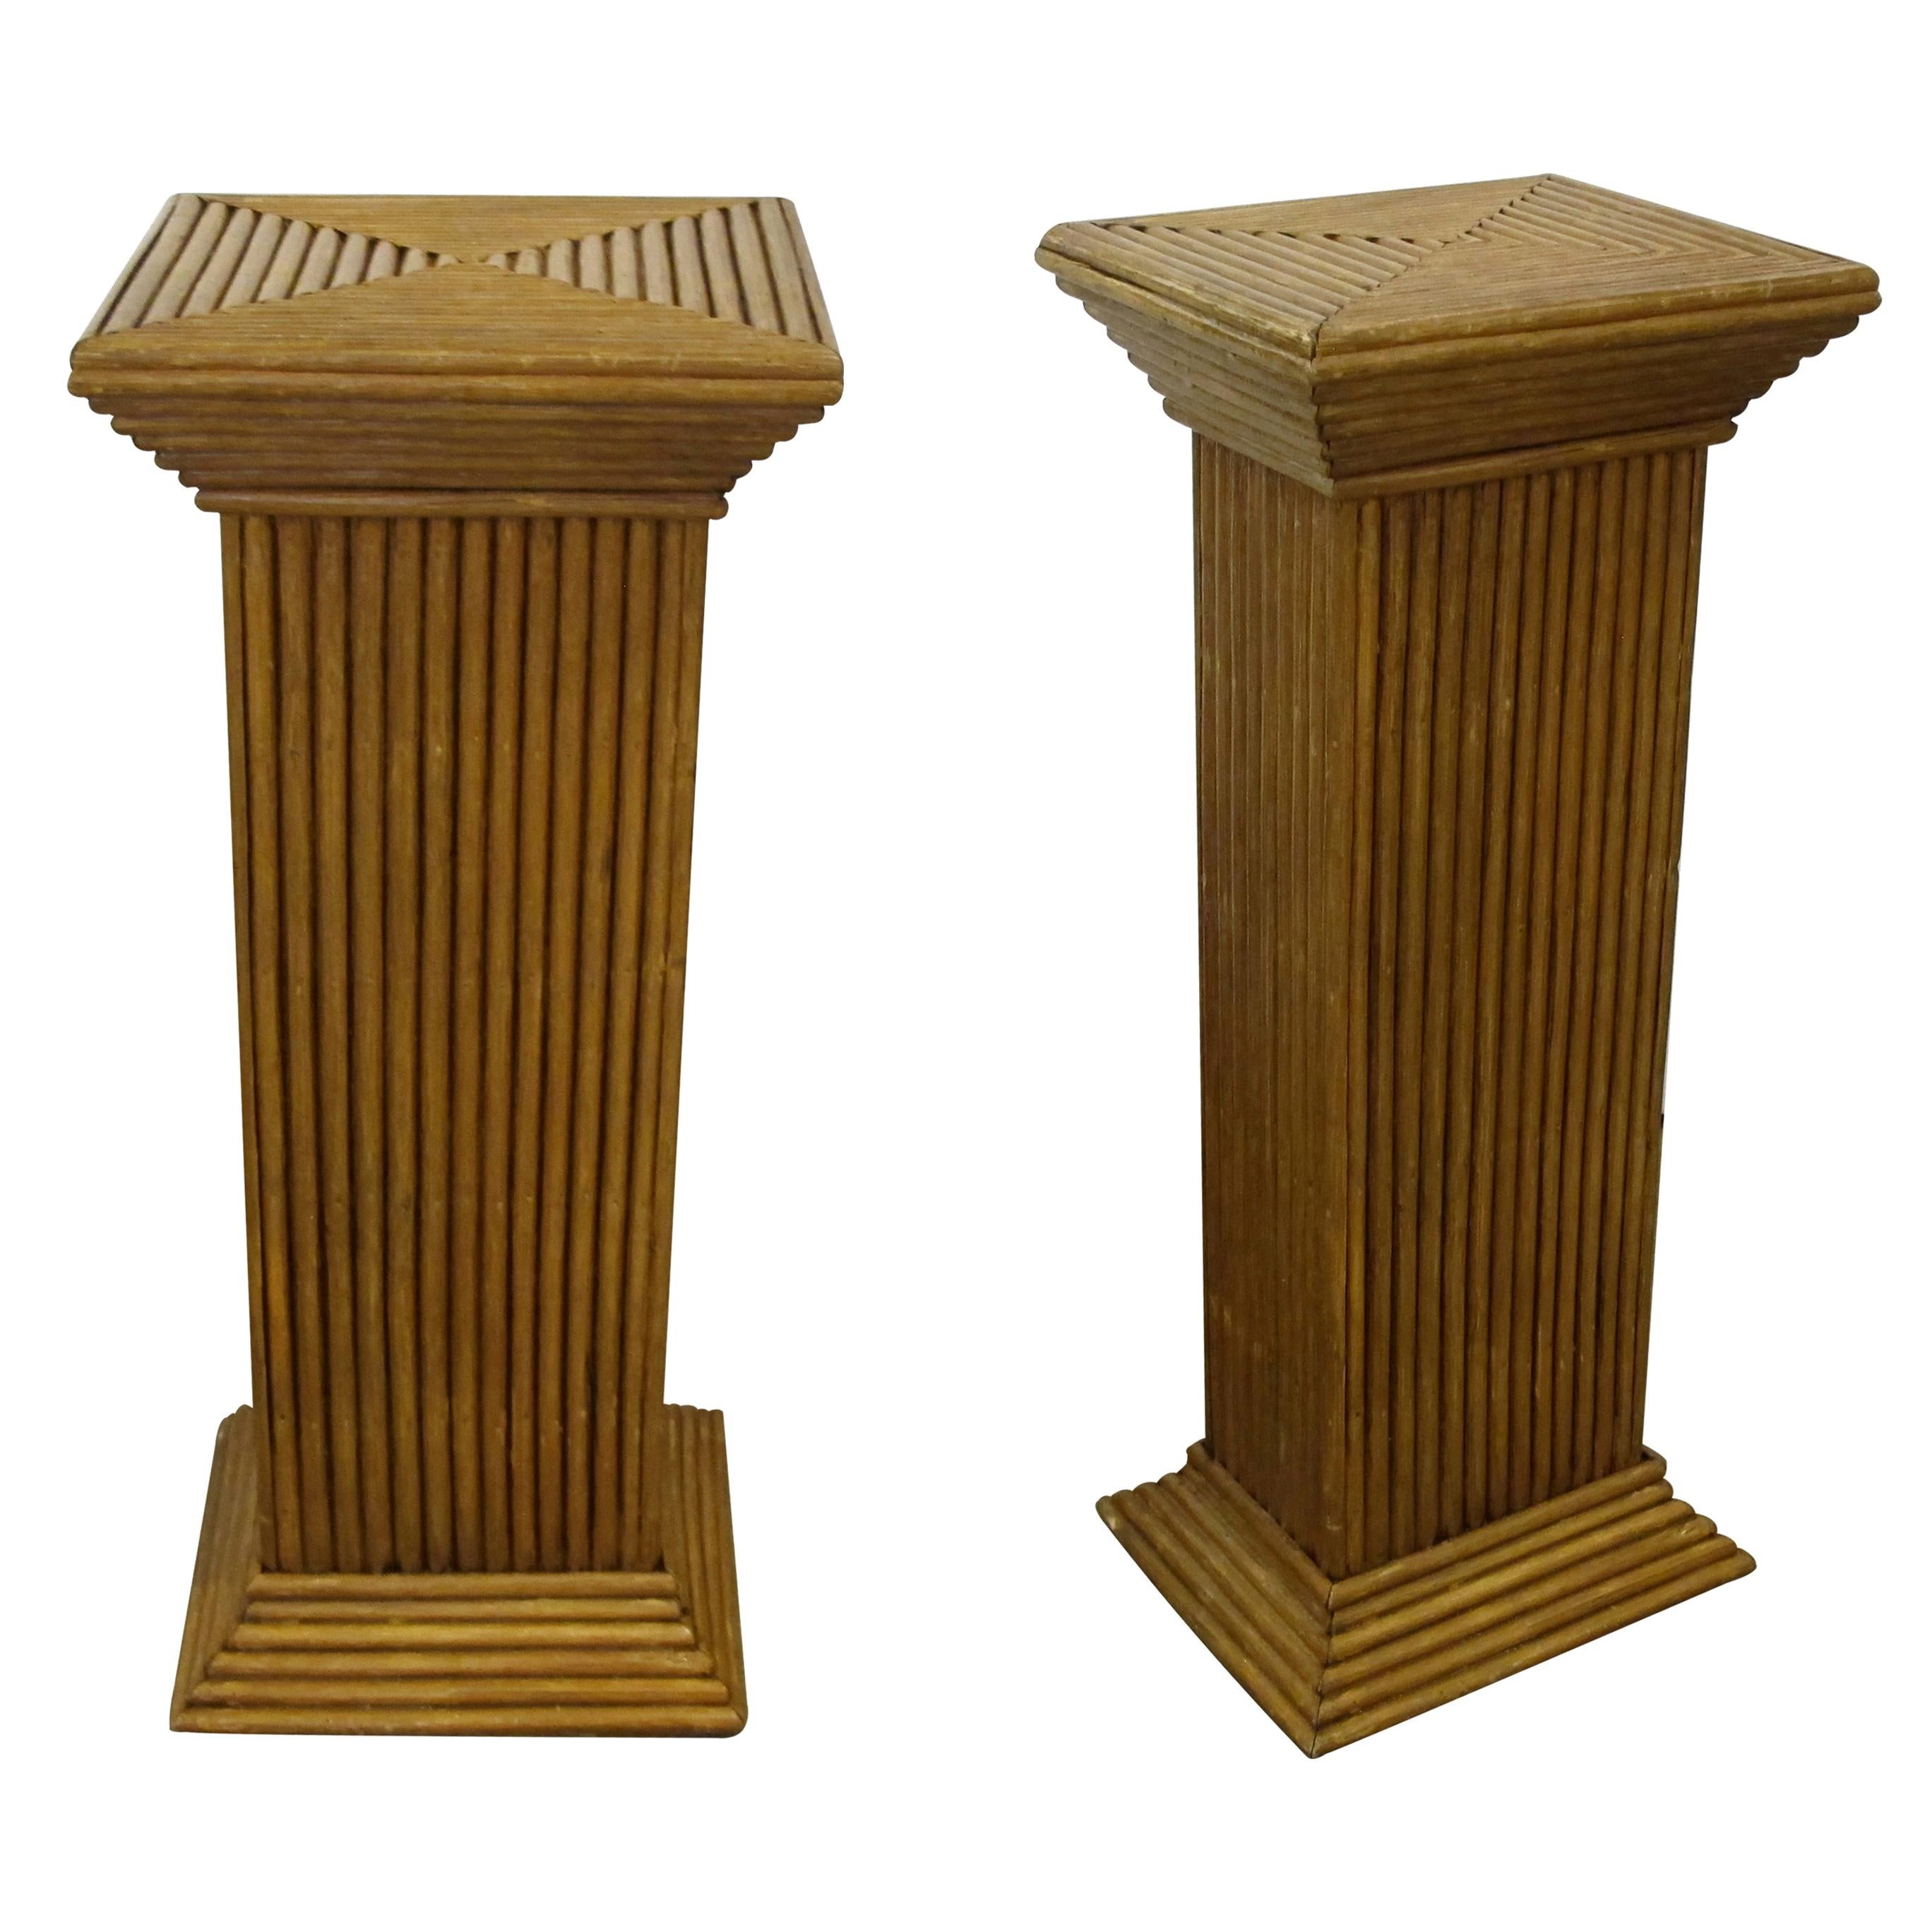 Pair of 1950s Mid Century Handcrafted Geometric Rattan Pedestals Columns Stands